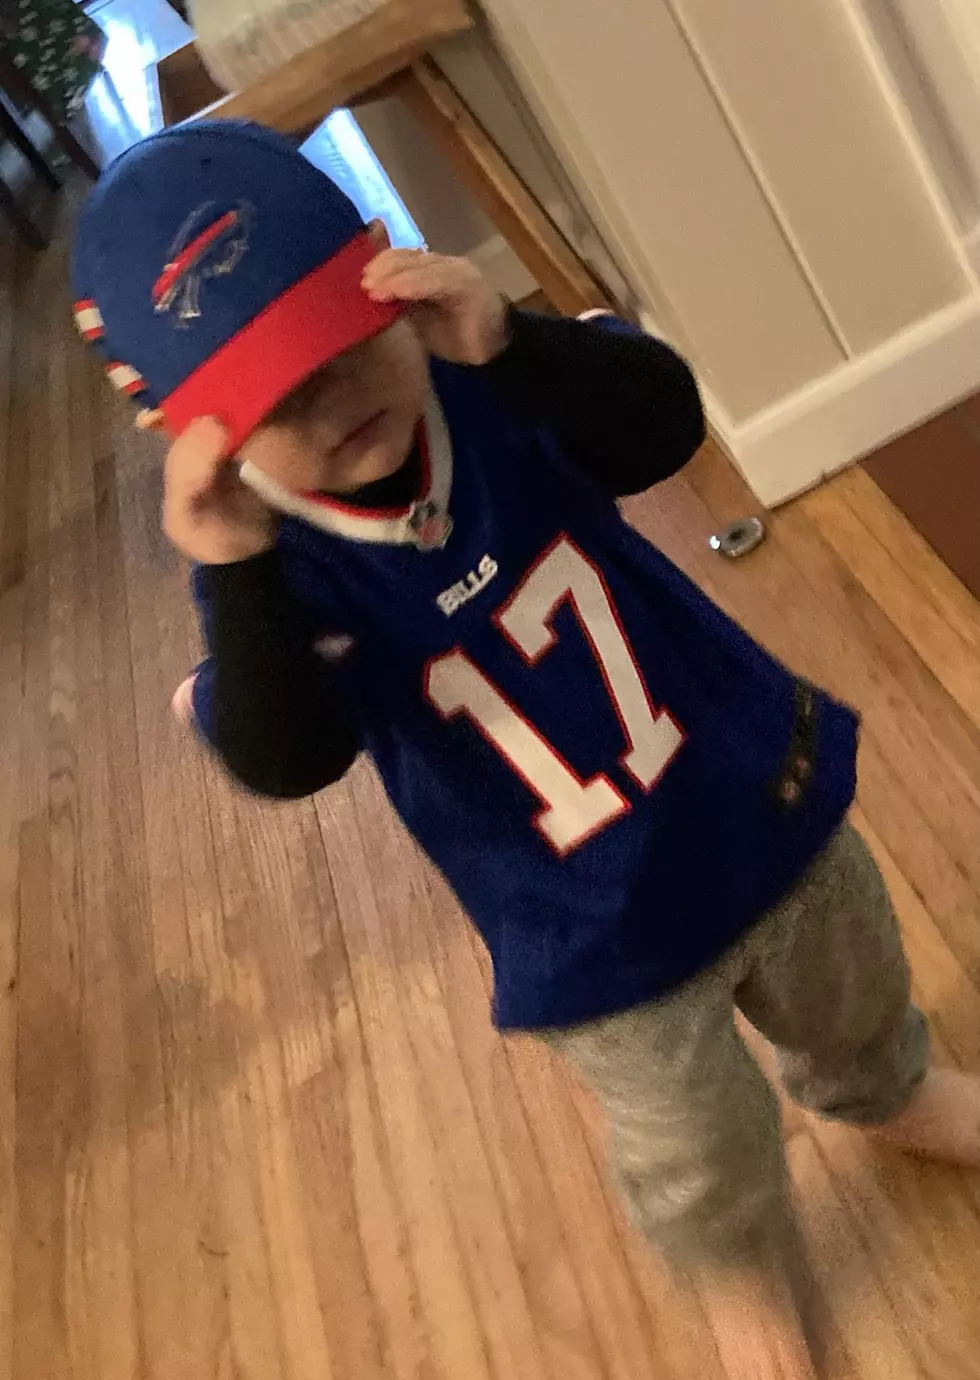 Daycare Creates Buffalo Bills Craft You Will Want to Do With the Kids